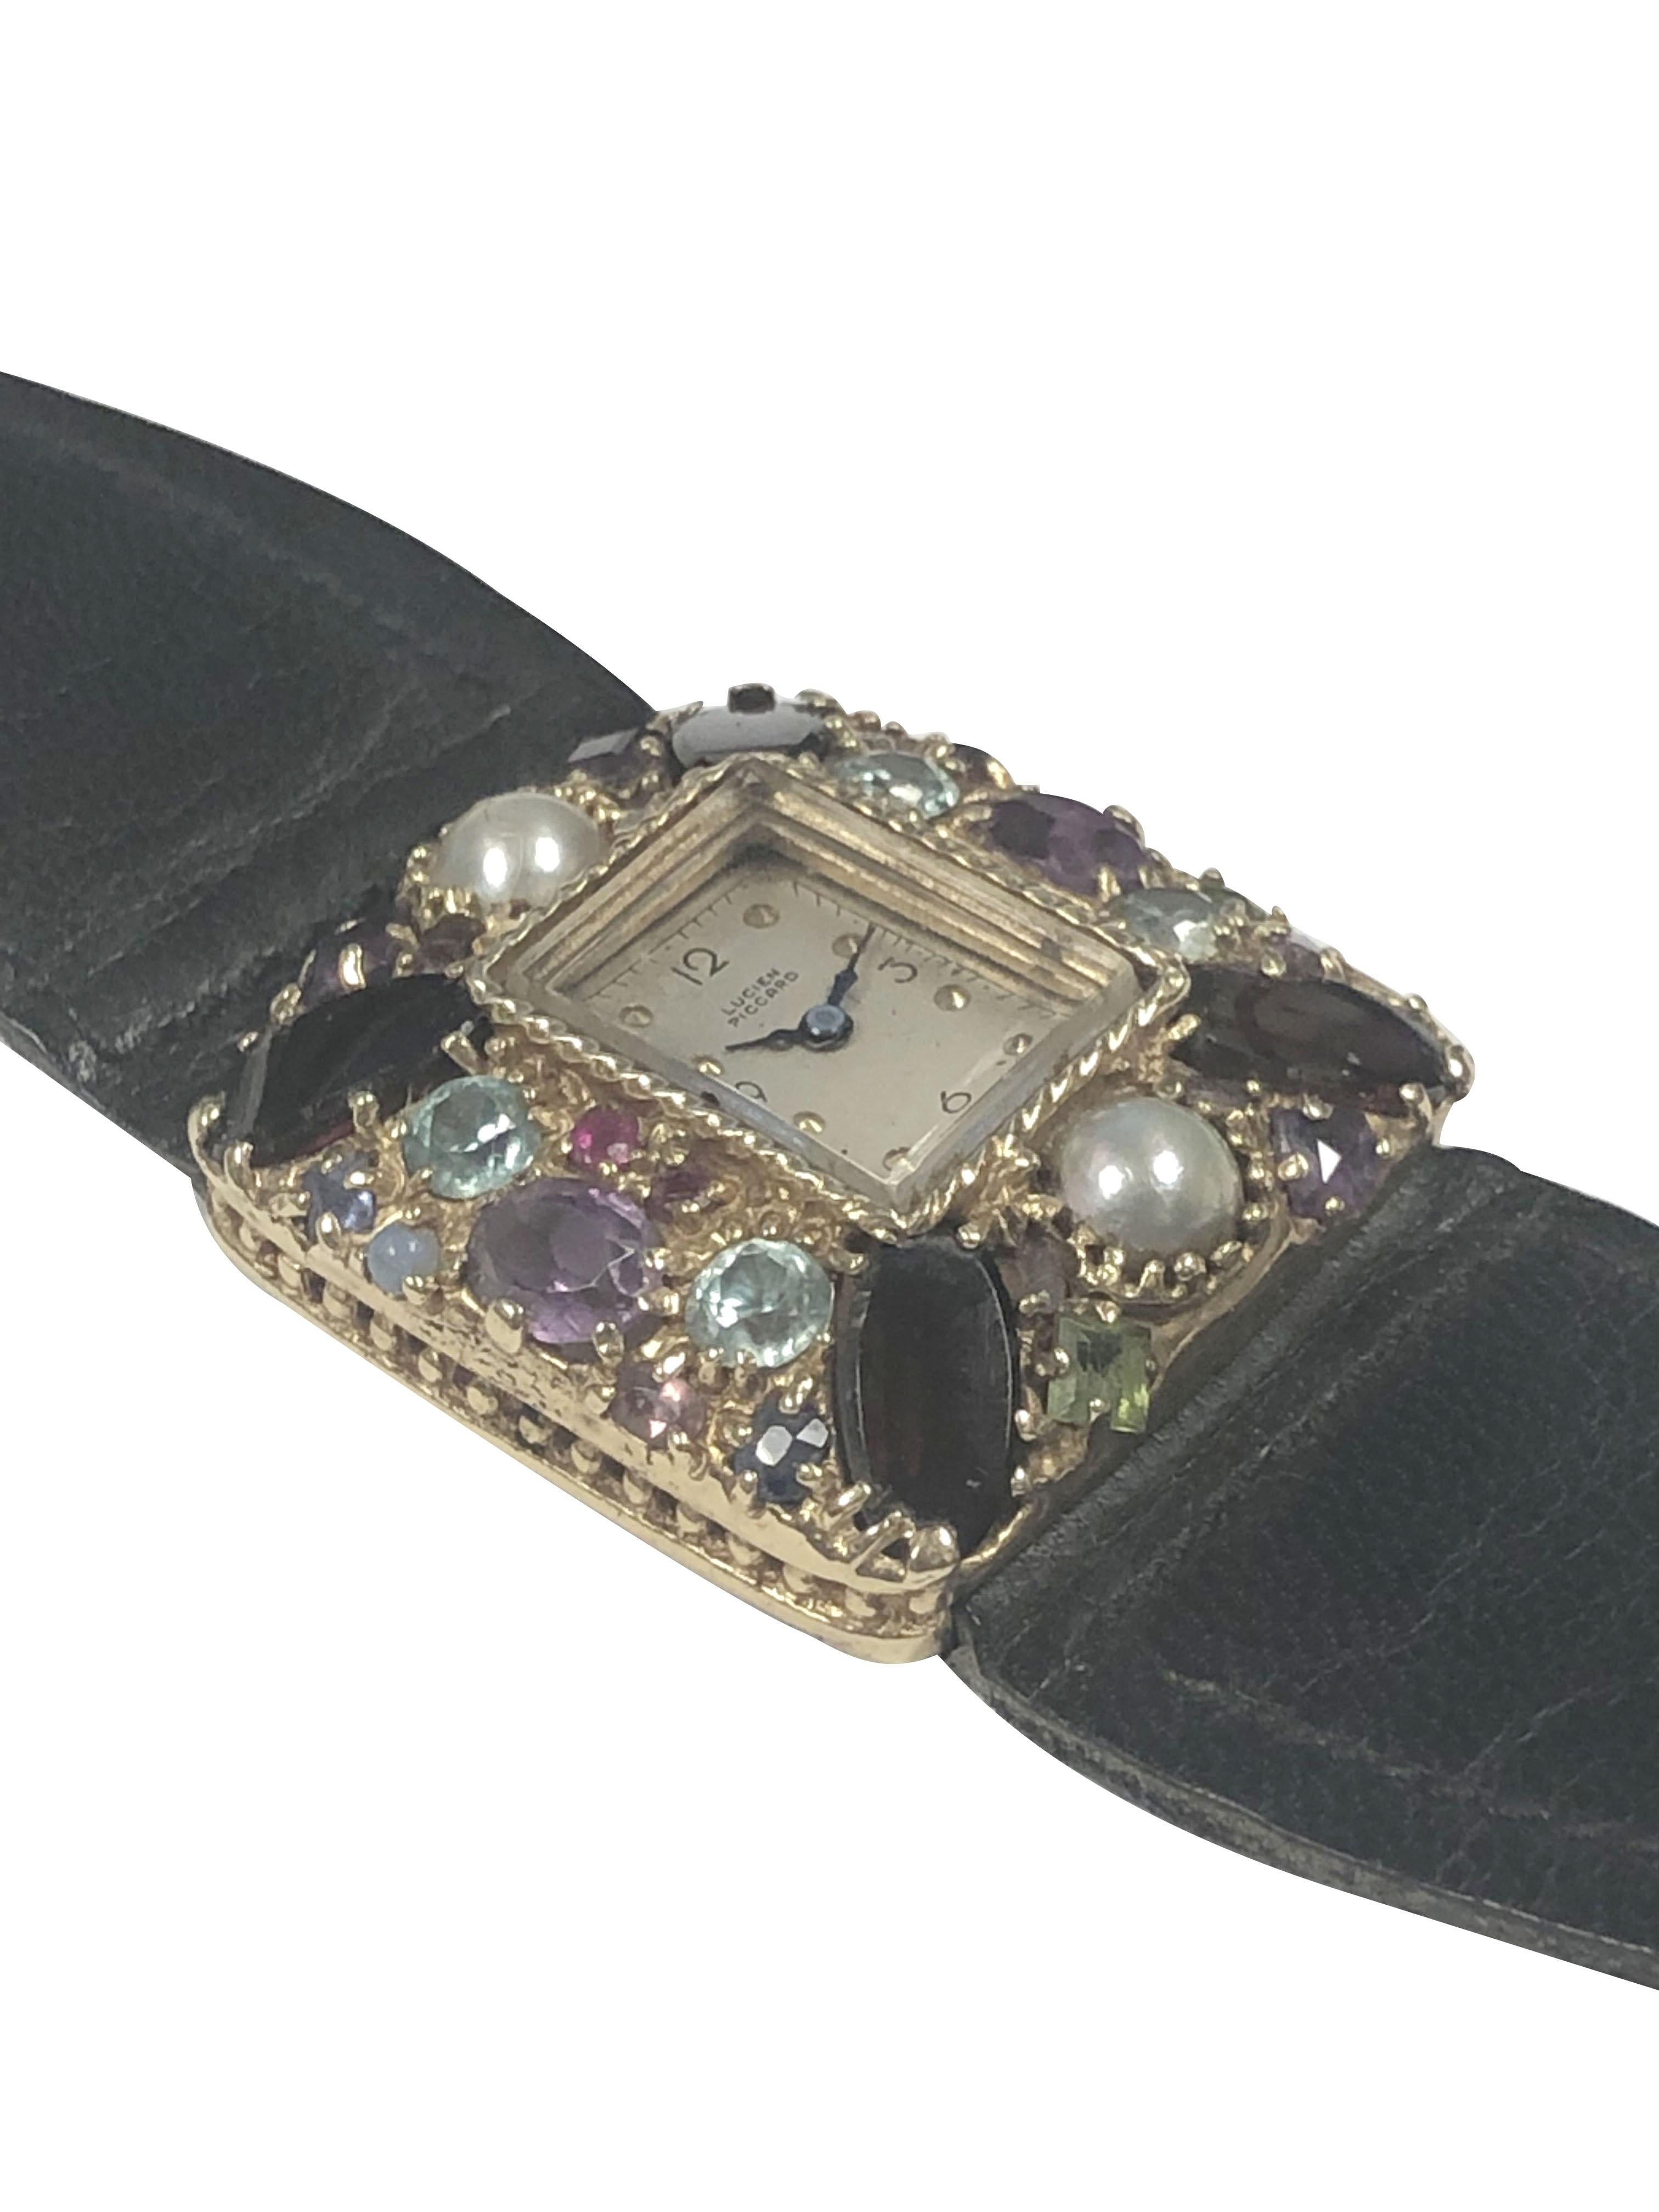 Circa 1960 Lucien Piccard Ladies Tutti Frutti Wrist Watch, 30 X 31 X 8 M.M. 14K Yellow Gold case that is set with Pearls, Garnets, Amethyst, zircon, Peridot. 17 Jewel mechanical, manual wind movement, silver satin dial  with raised gold dot markers.